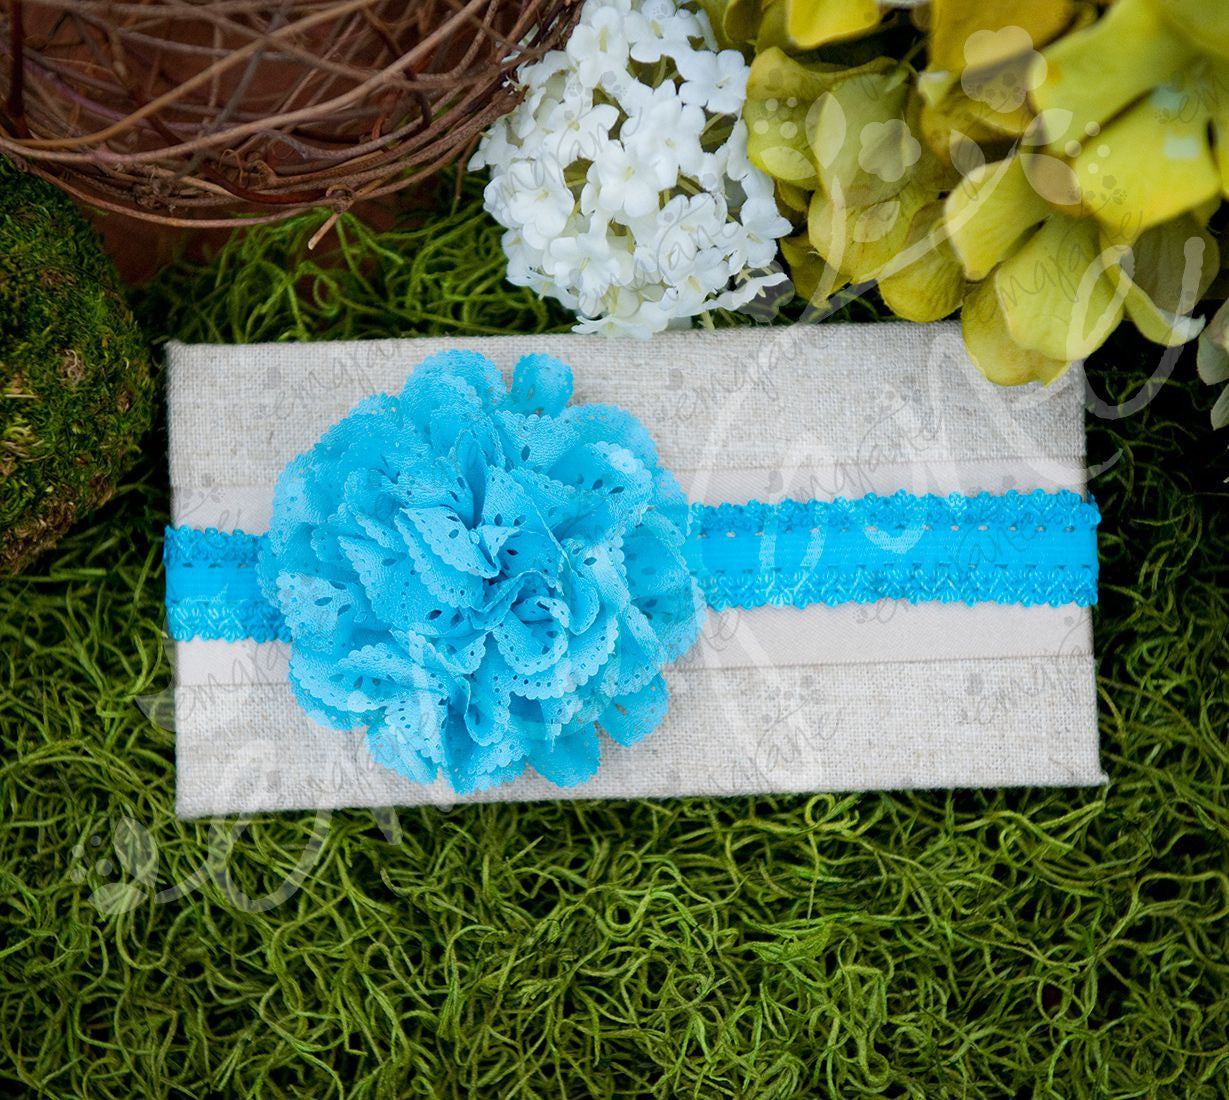 Fancy Eyelet Laced Flowers on Lace Headbands (Mega Pack), Headbands,Hair Flowers,Bows, Ema Jane Boutique